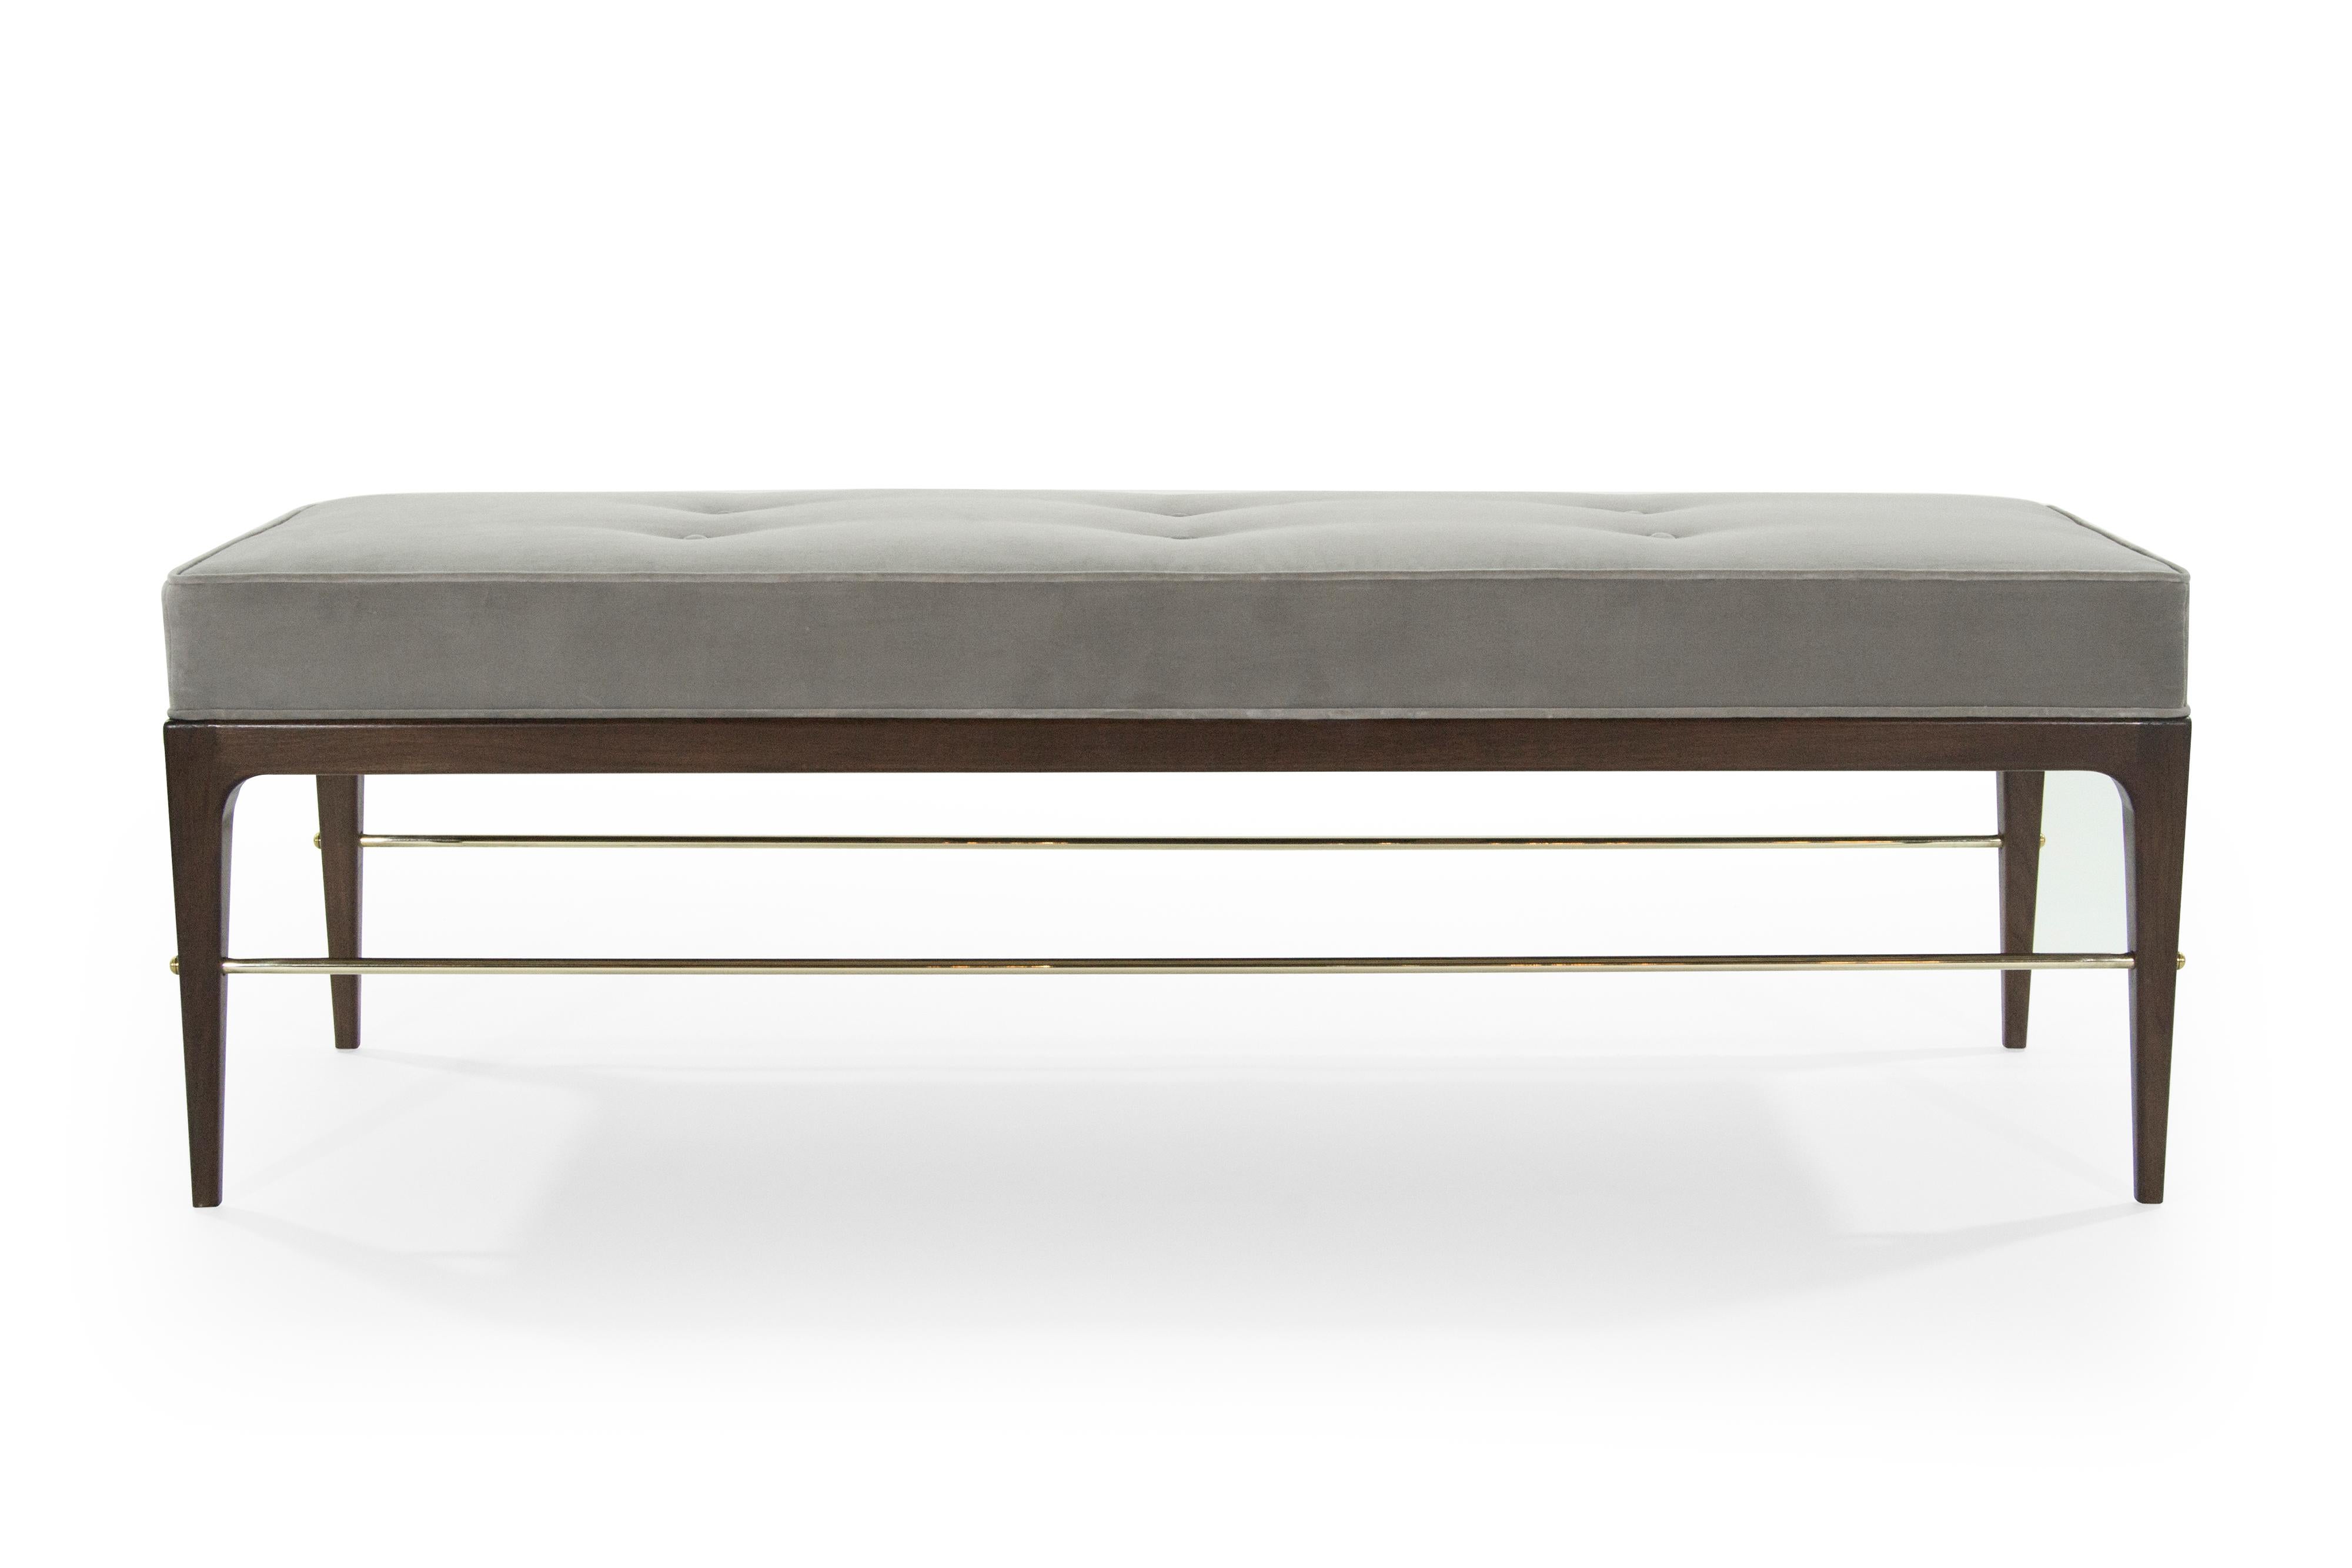 Draw clean lines with contemporary furniture inspired by the Mid-Century Modern Legend, Edward Wormley (1907-1995), a leading American designer. Echoing the brass bar below, this velvet-upholstered cushion has lines of crisp welting around the edge.